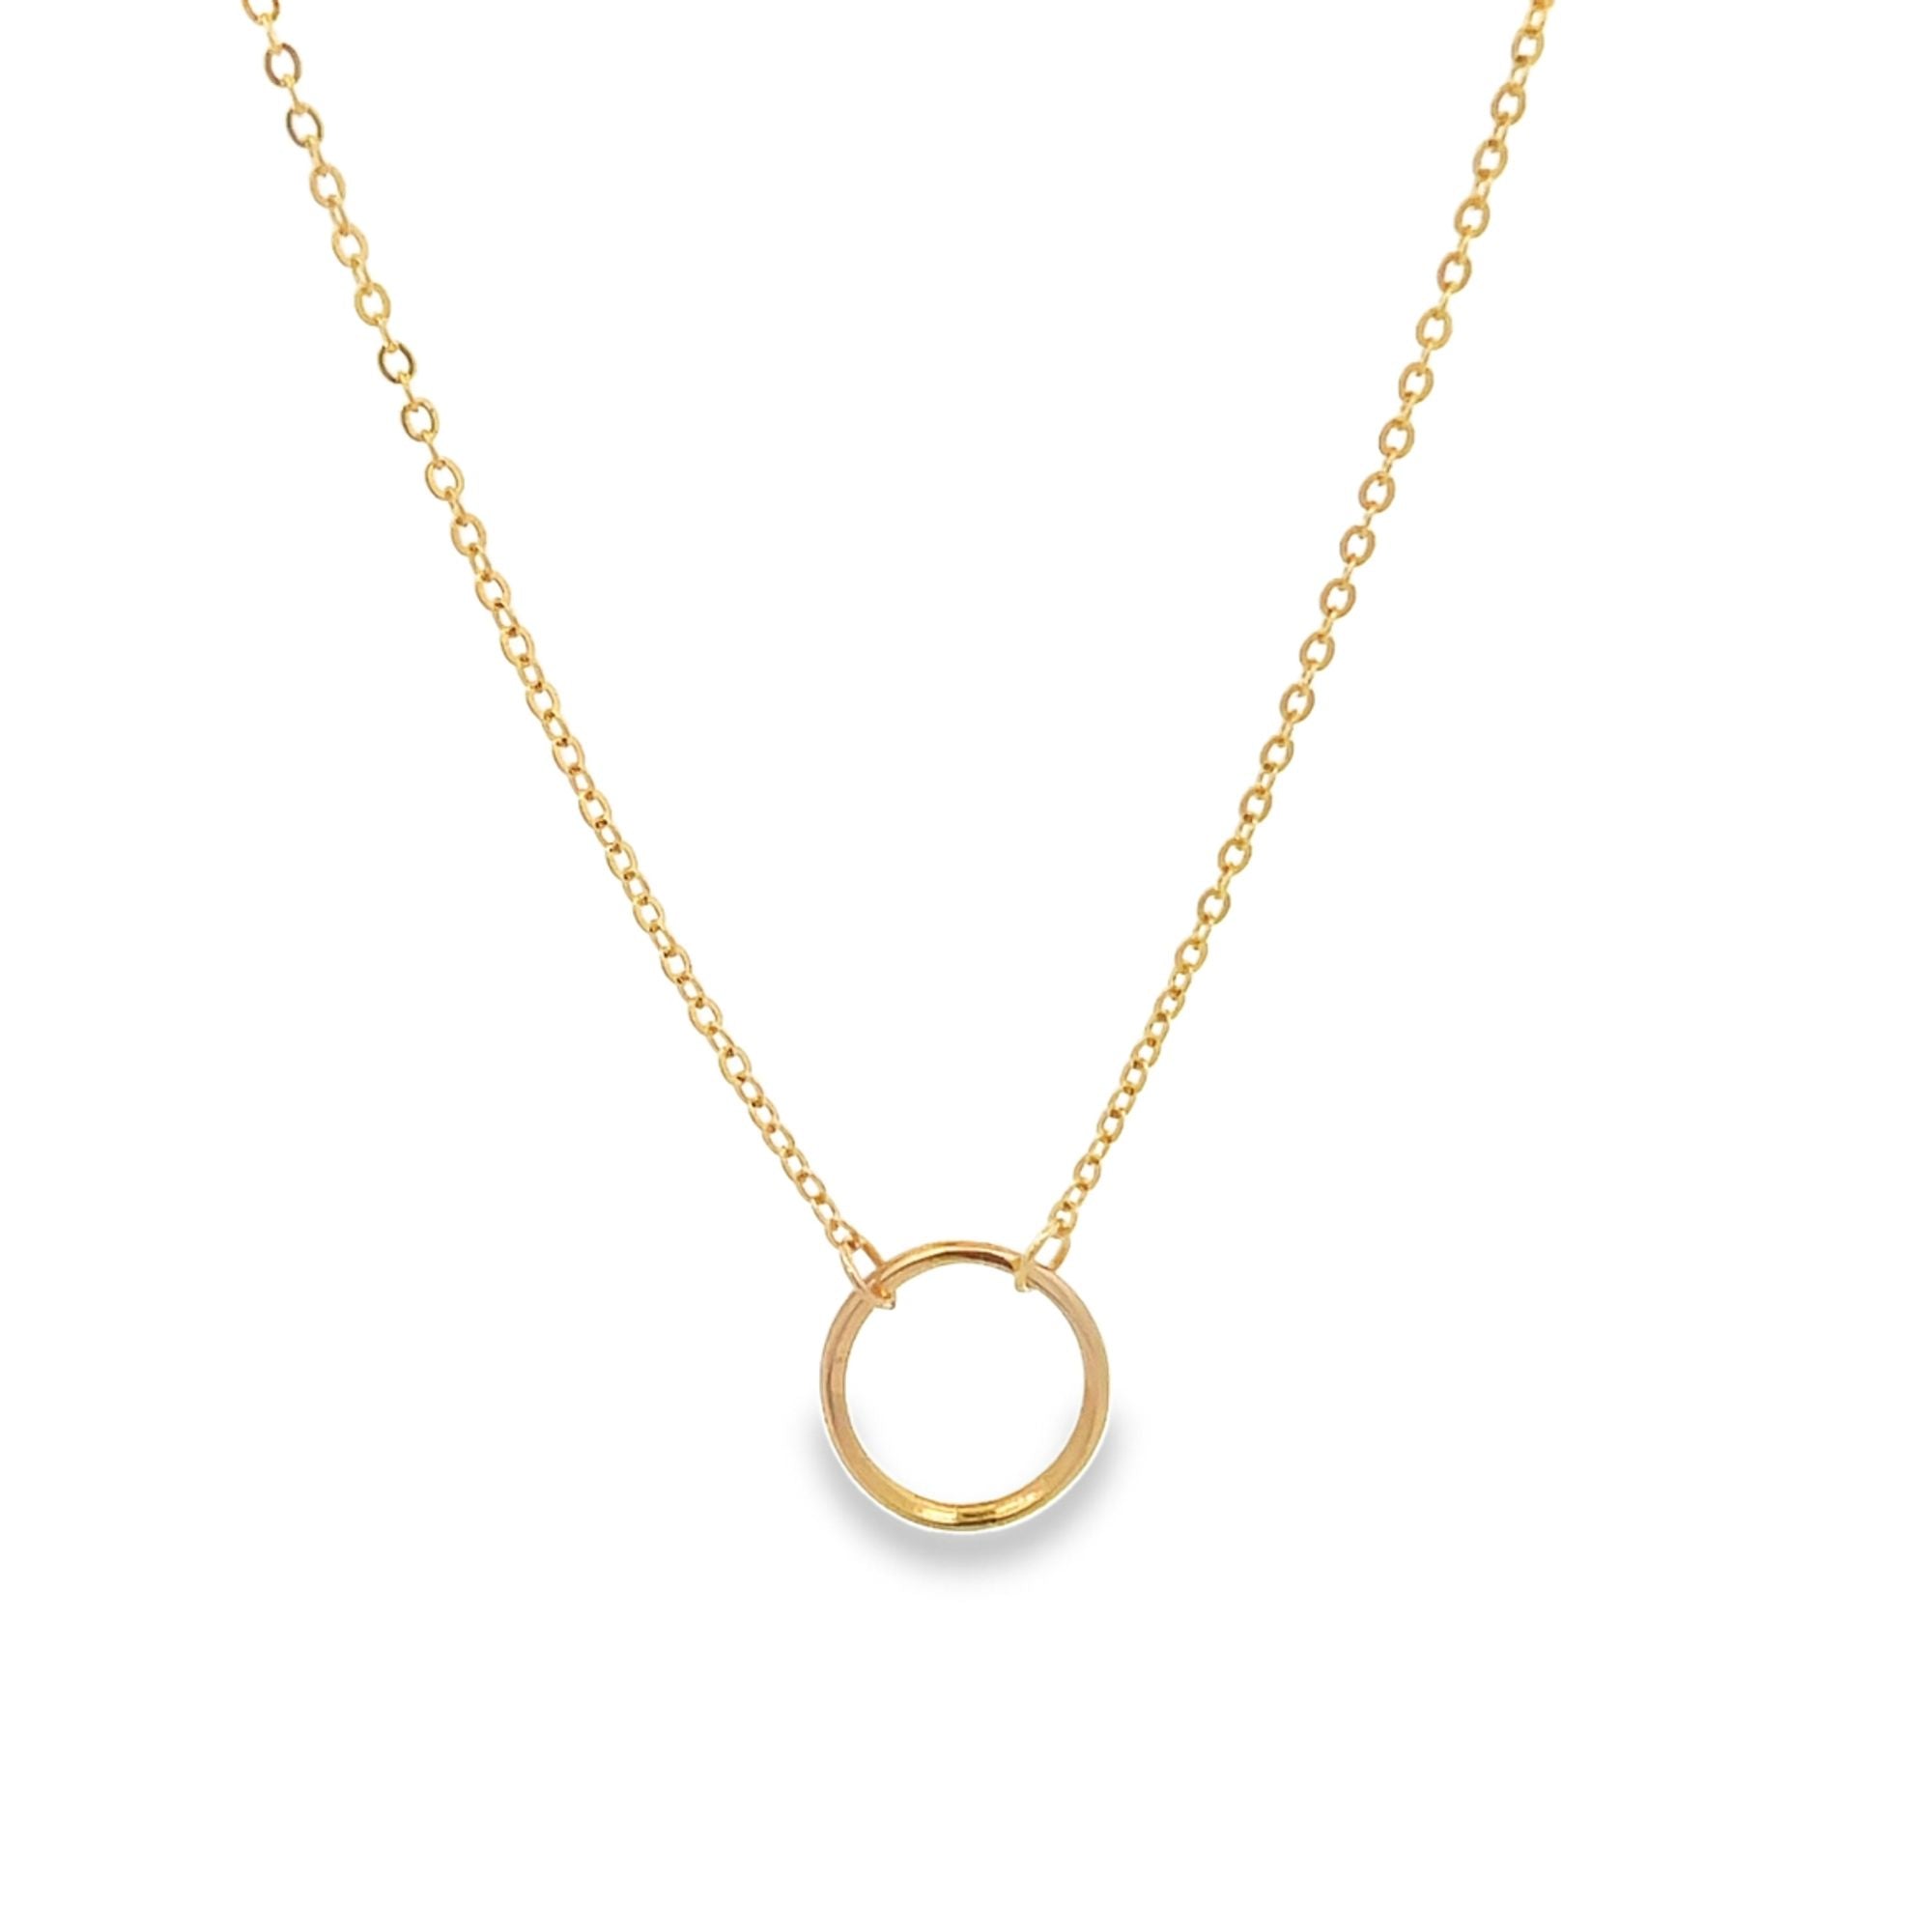 Gold Karma Circle Necklace For 18K Gold Filled (F137, F137A, F137B)